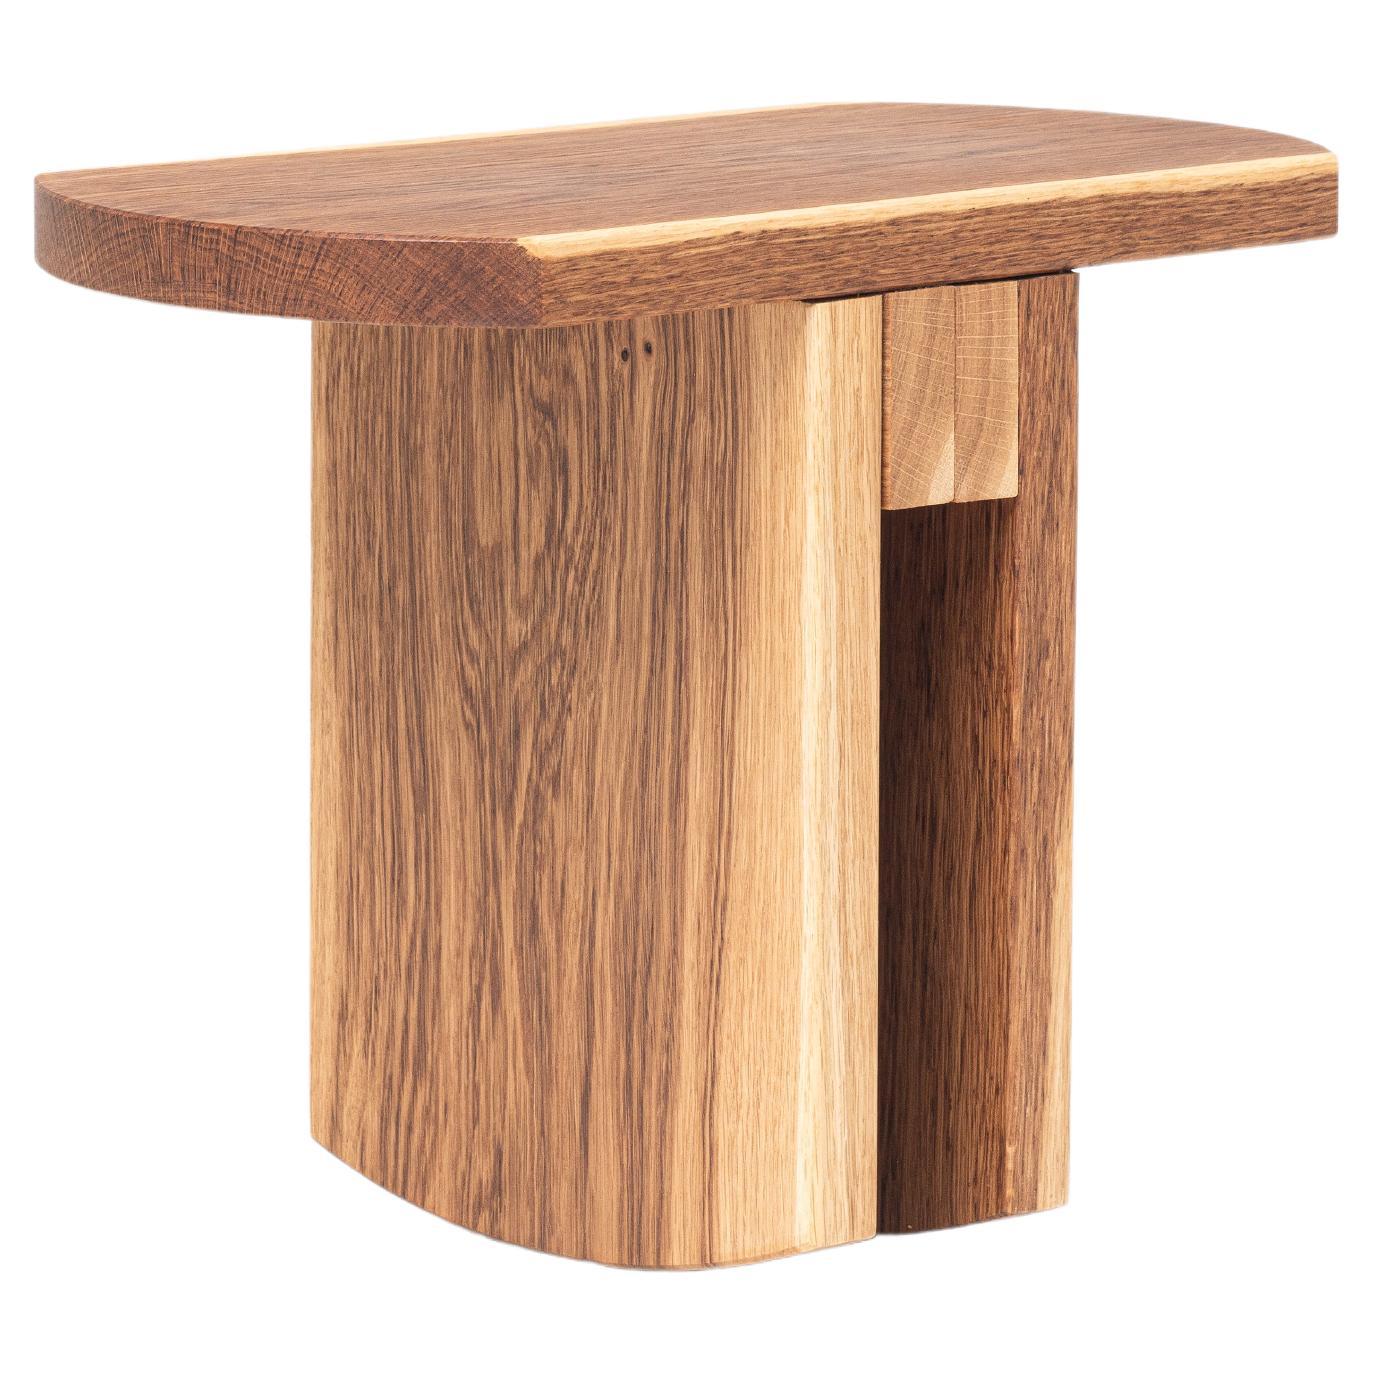 Low Stool "Oslinchik 07" Natural Oak Collection